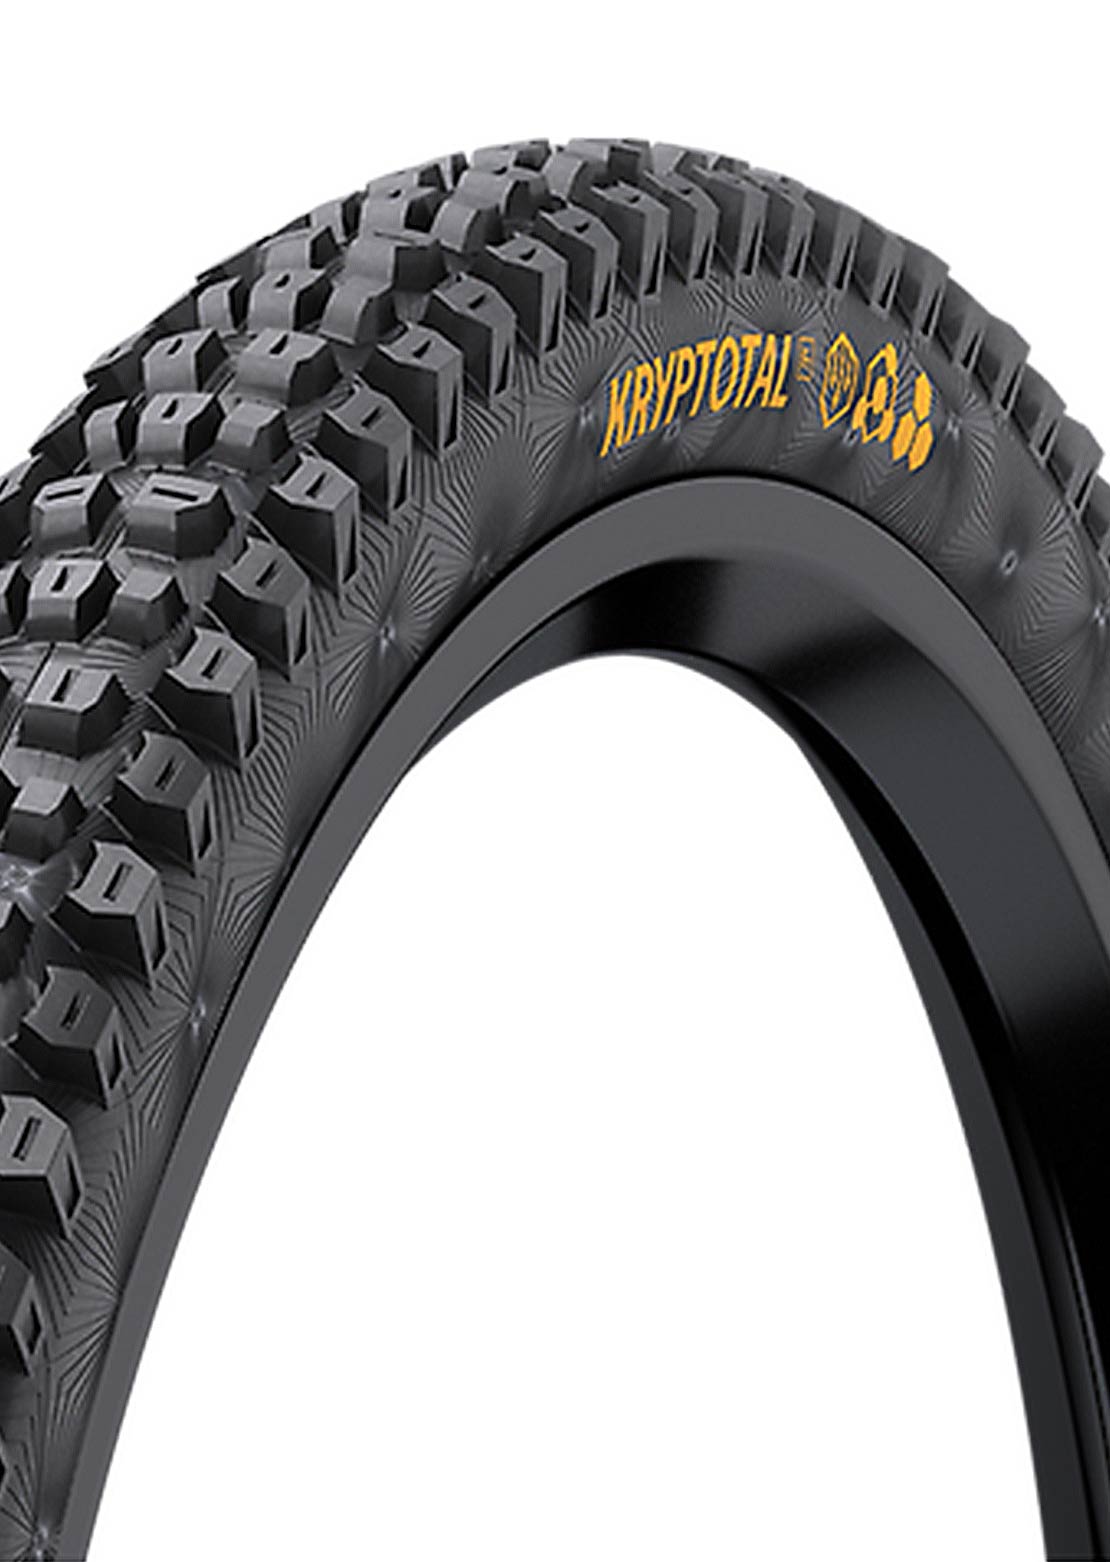 Continental Kryptotal-F DH Casing SuperSoft Folding Mountain Bike Tire - 27.5&quot; x 2.4&quot; Black